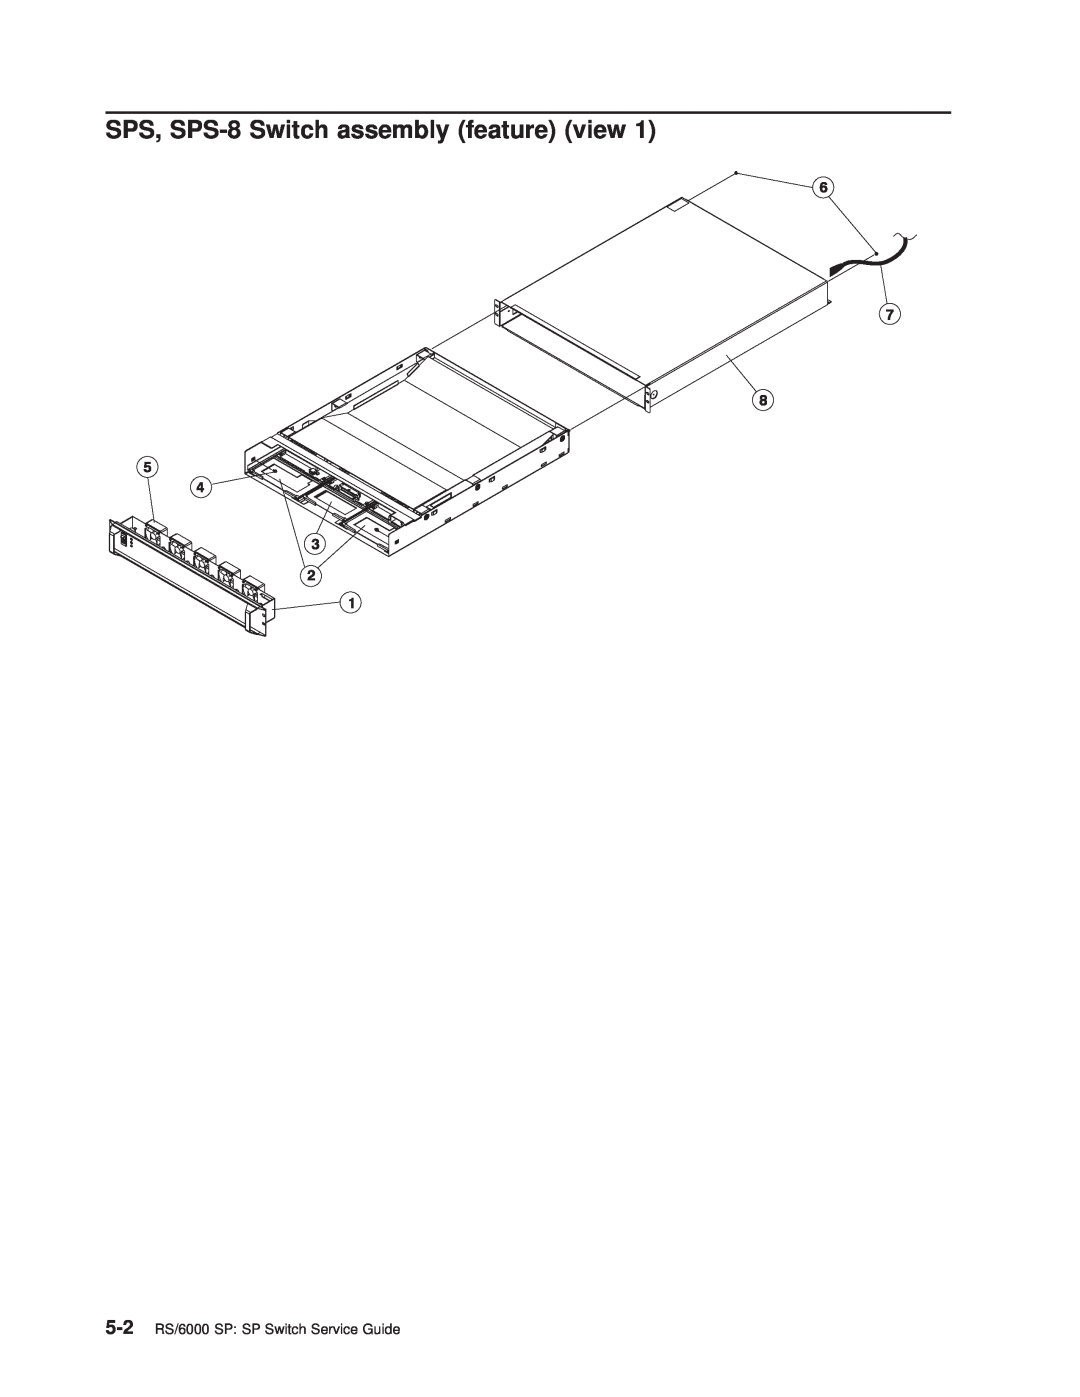 IBM manual SPS, SPS-8 Switch assembly feature view, 5-2 RS/6000 SP SP Switch Service Guide 